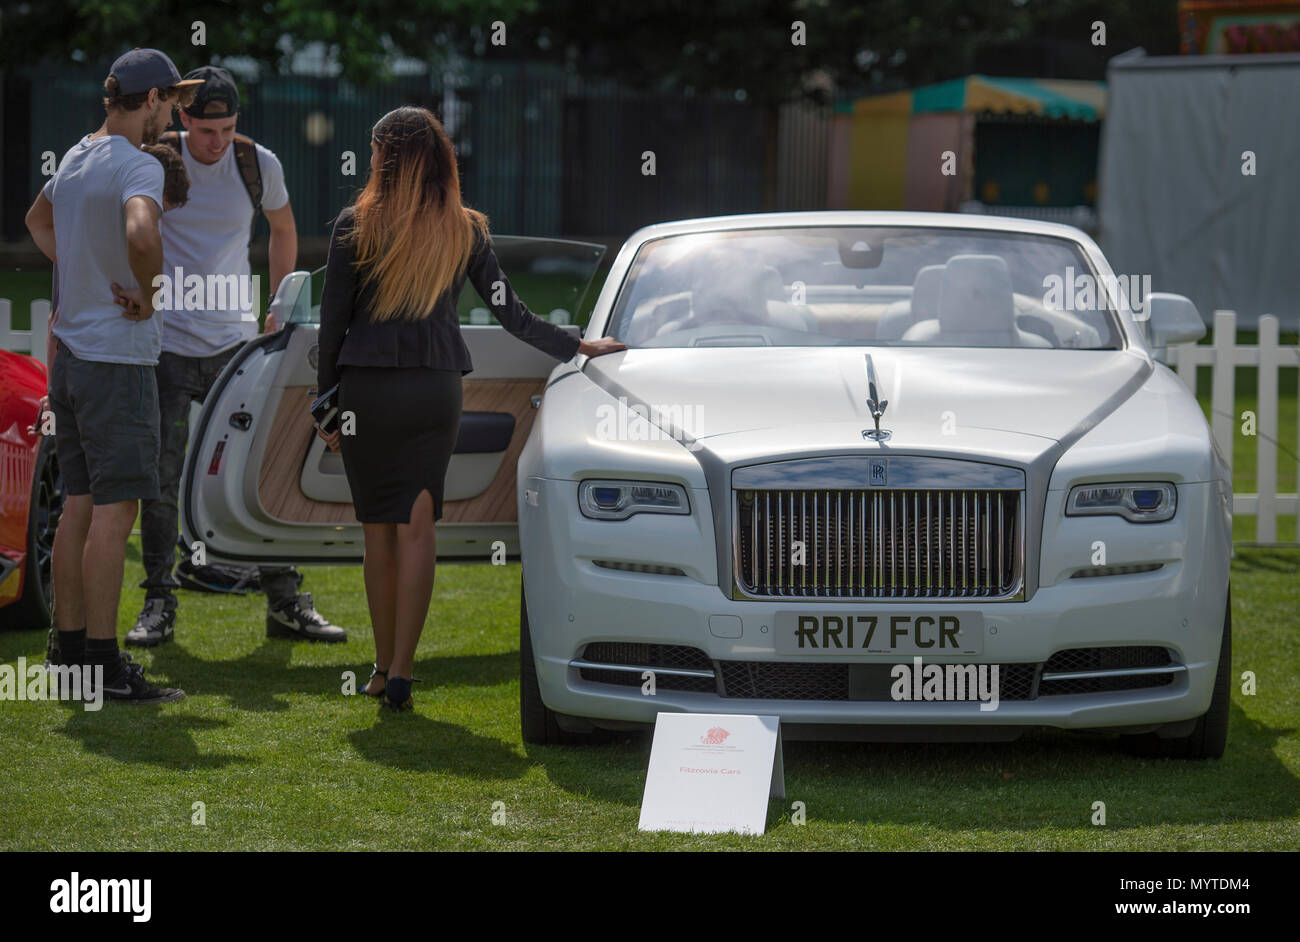 Honourable Artillery Company, London, UK. 8 June, 2018. A display of some of the world’s finest cars in the intimate setting of the gardens of the Honourable Artillery Company under a hot sun, surrounded by City offices. Credit: Malcolm Park/Alamy Live News. Stock Photo